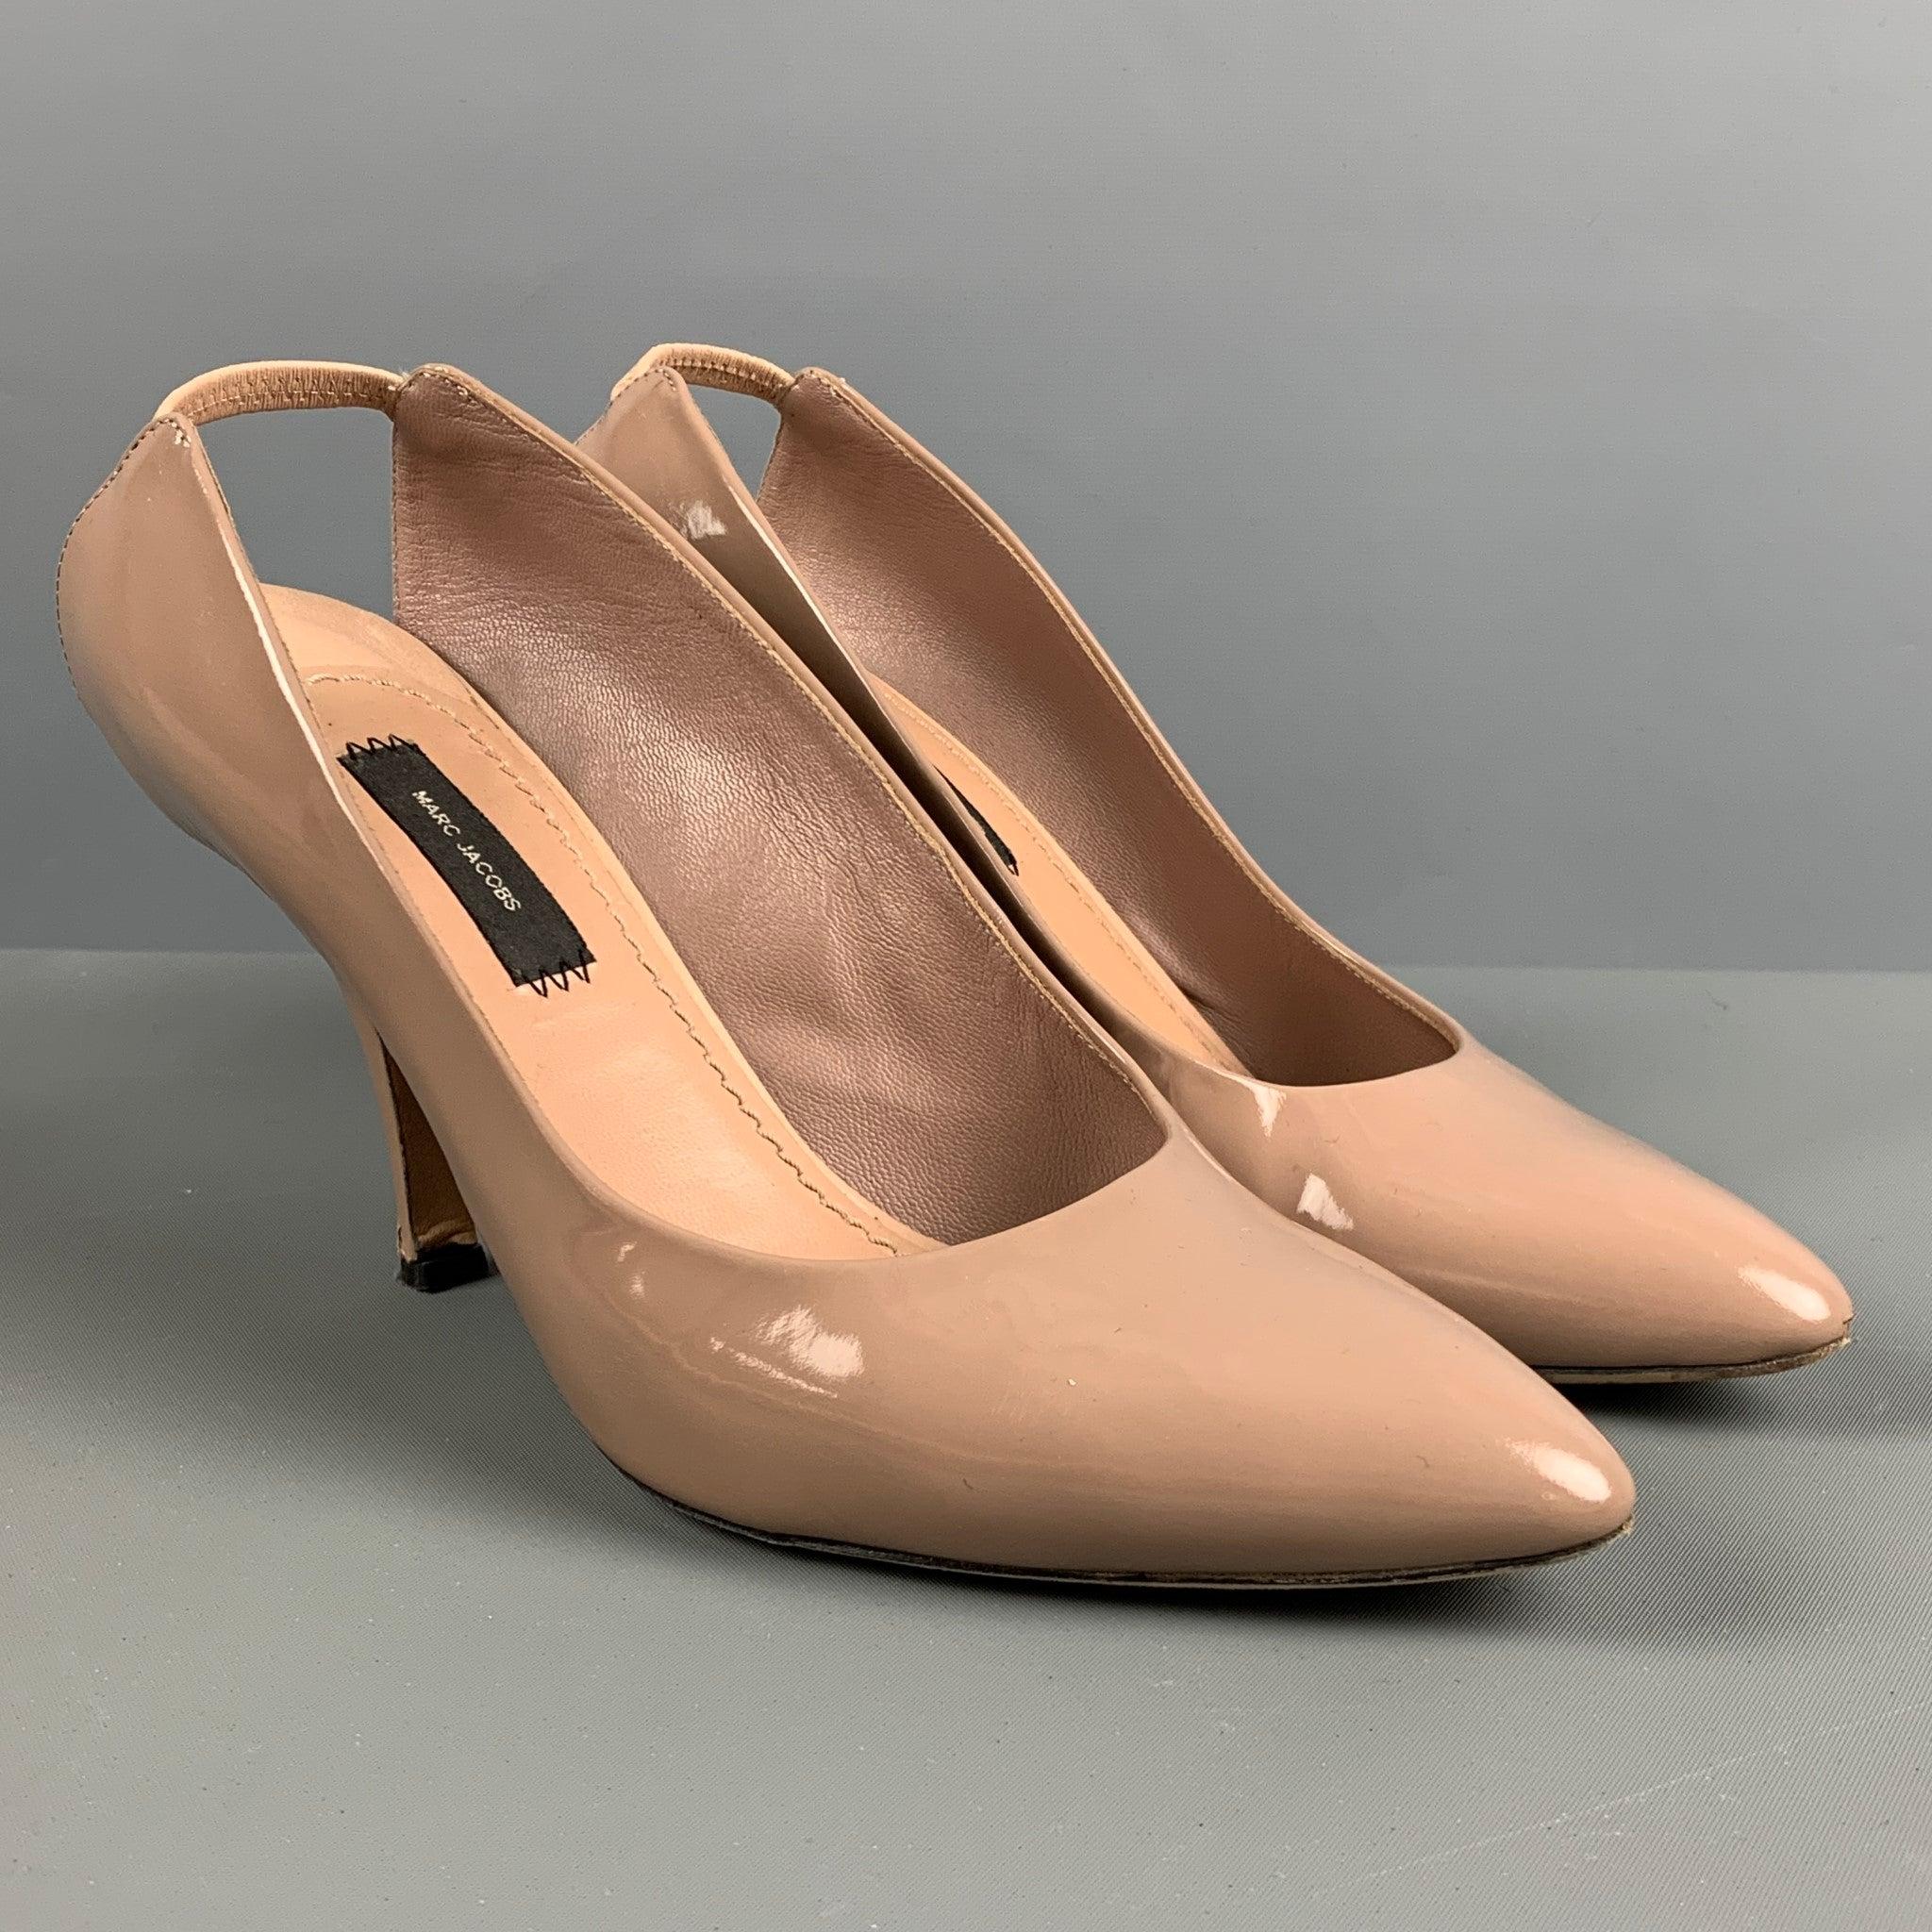 MARC JACOBS pumps comes in a taupe patent leather featuring a slingback closure, pointed toe, and a kitten heels. Comes with Box. Made in Italy. Very Good Pre-Owned Condition. Moderate signs of wear. 

Marked:   38 

Measurements: 
  Heel: 3.5